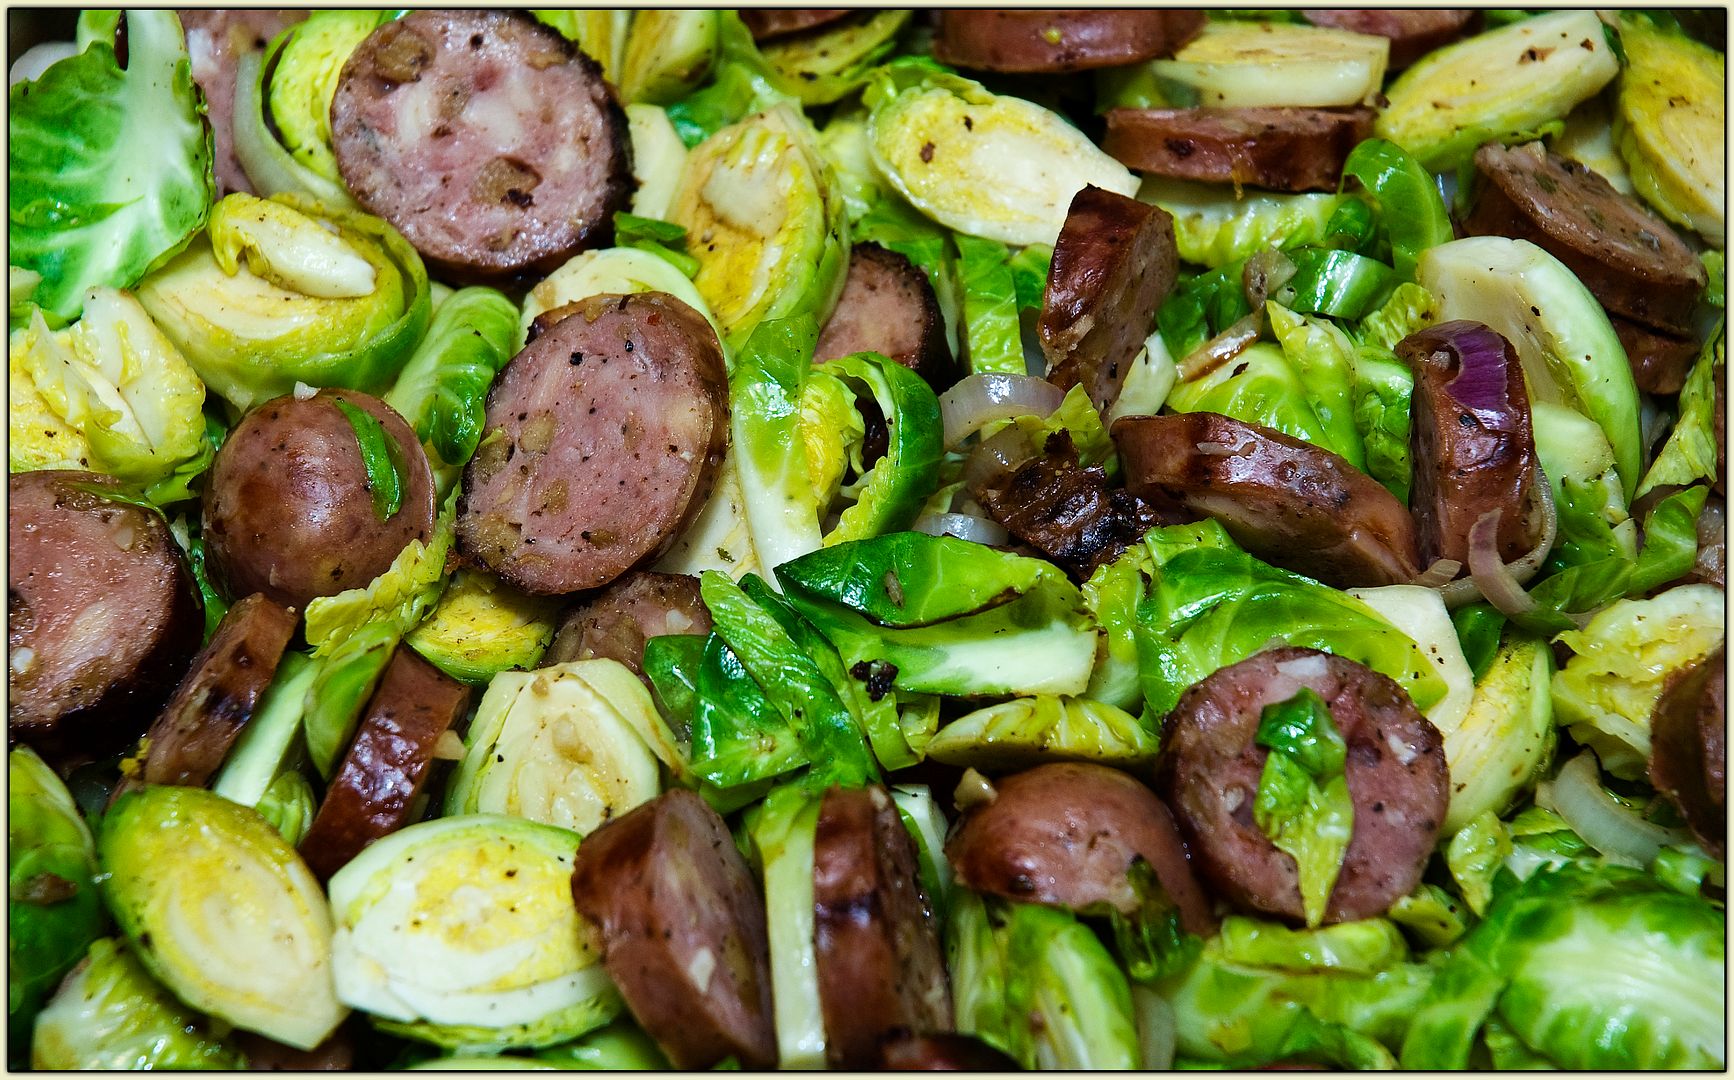 Sausage 'n' Sprouts